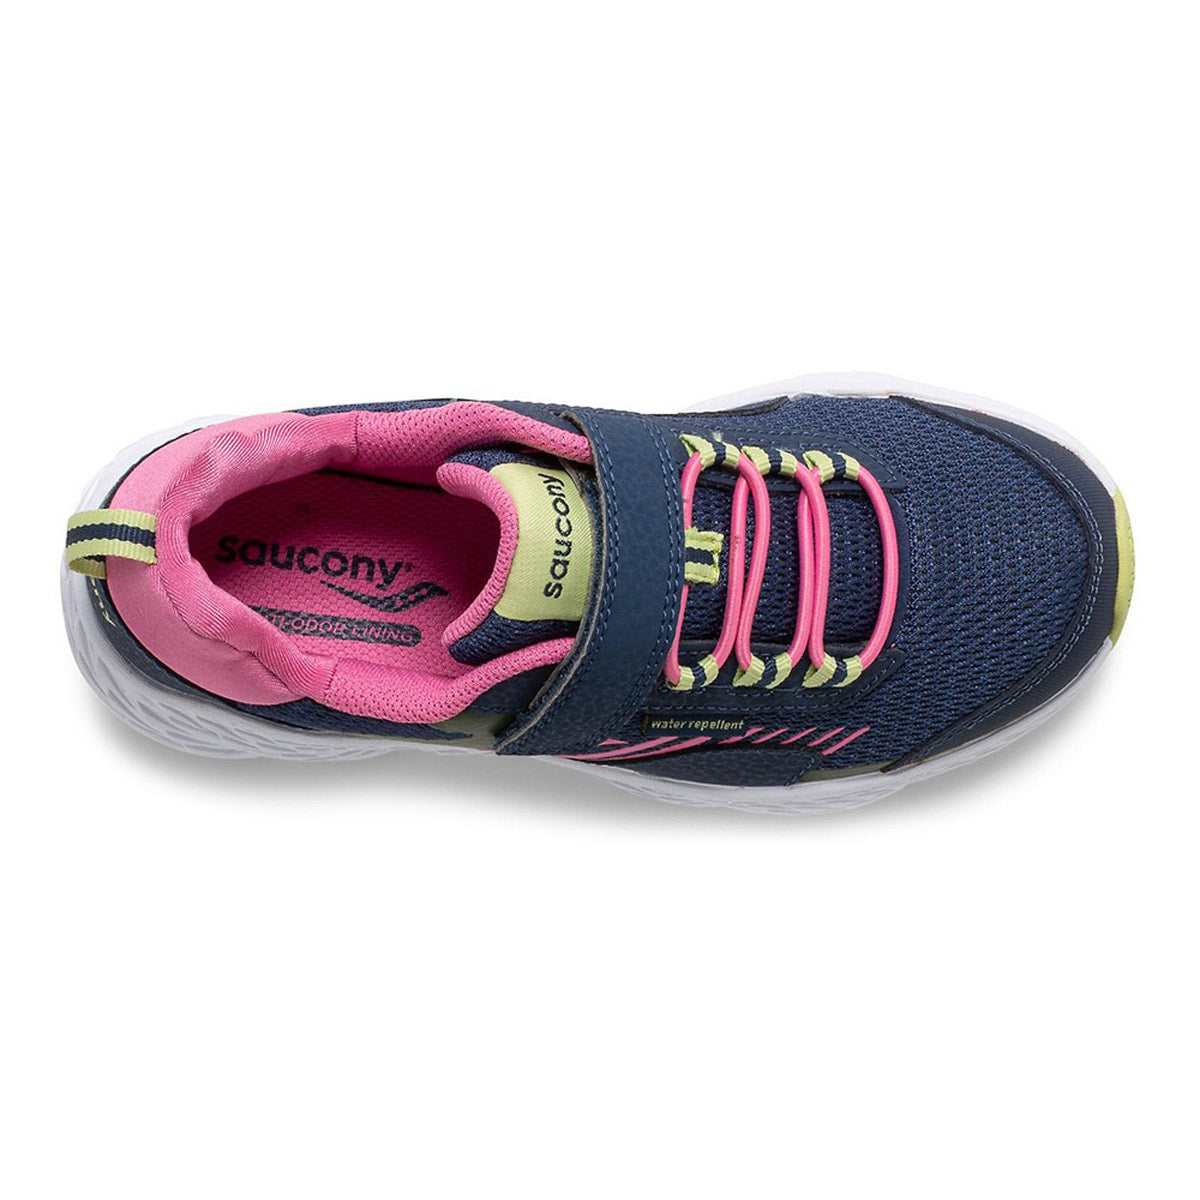 Top view of a Saucony Wind Shield Navy/Green/Pink sneaker, featuring a water-repellent upper.